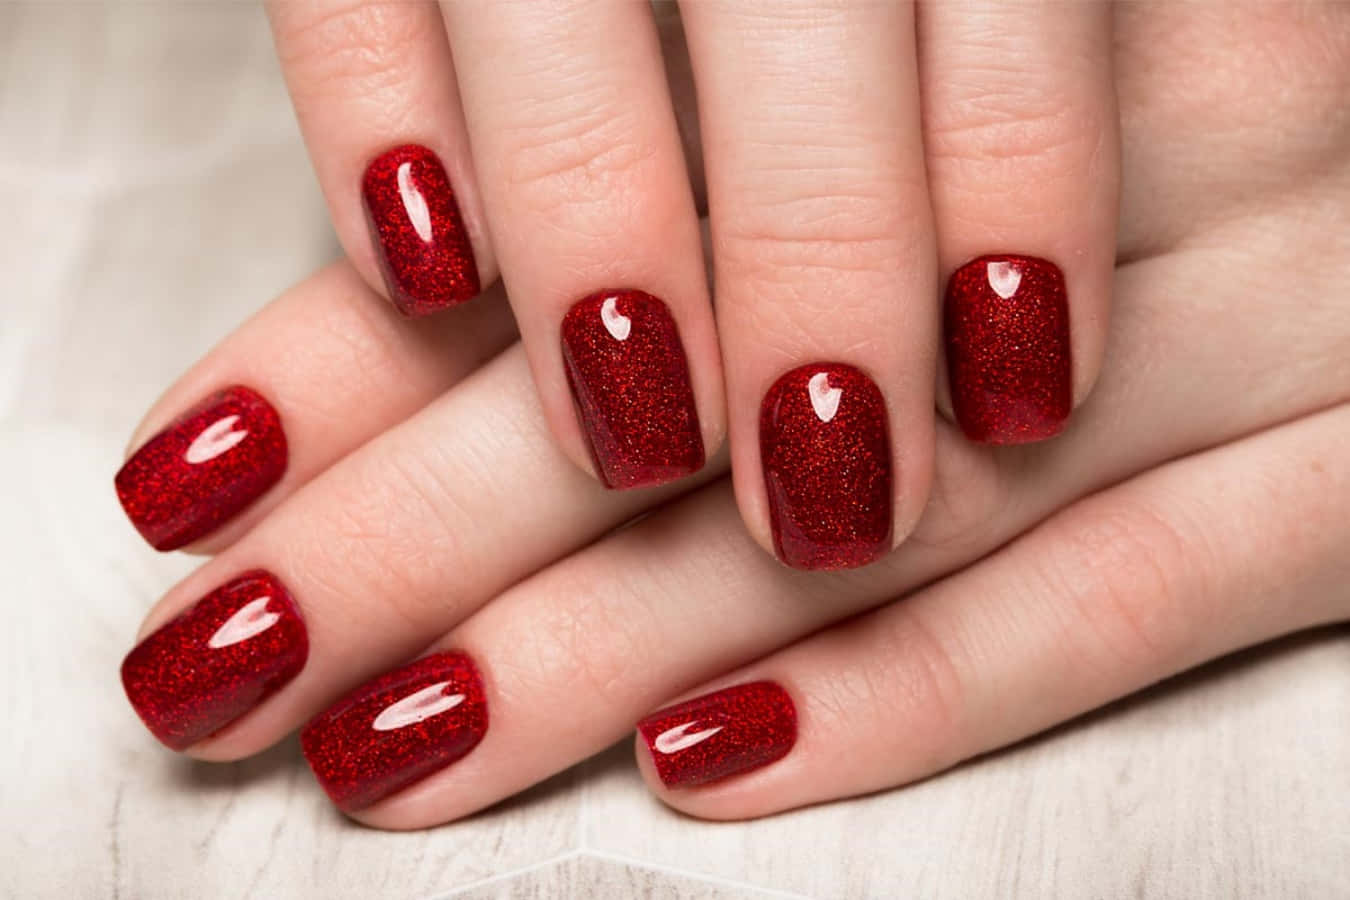 Top 20 places for Manicures in UK - Treatwell